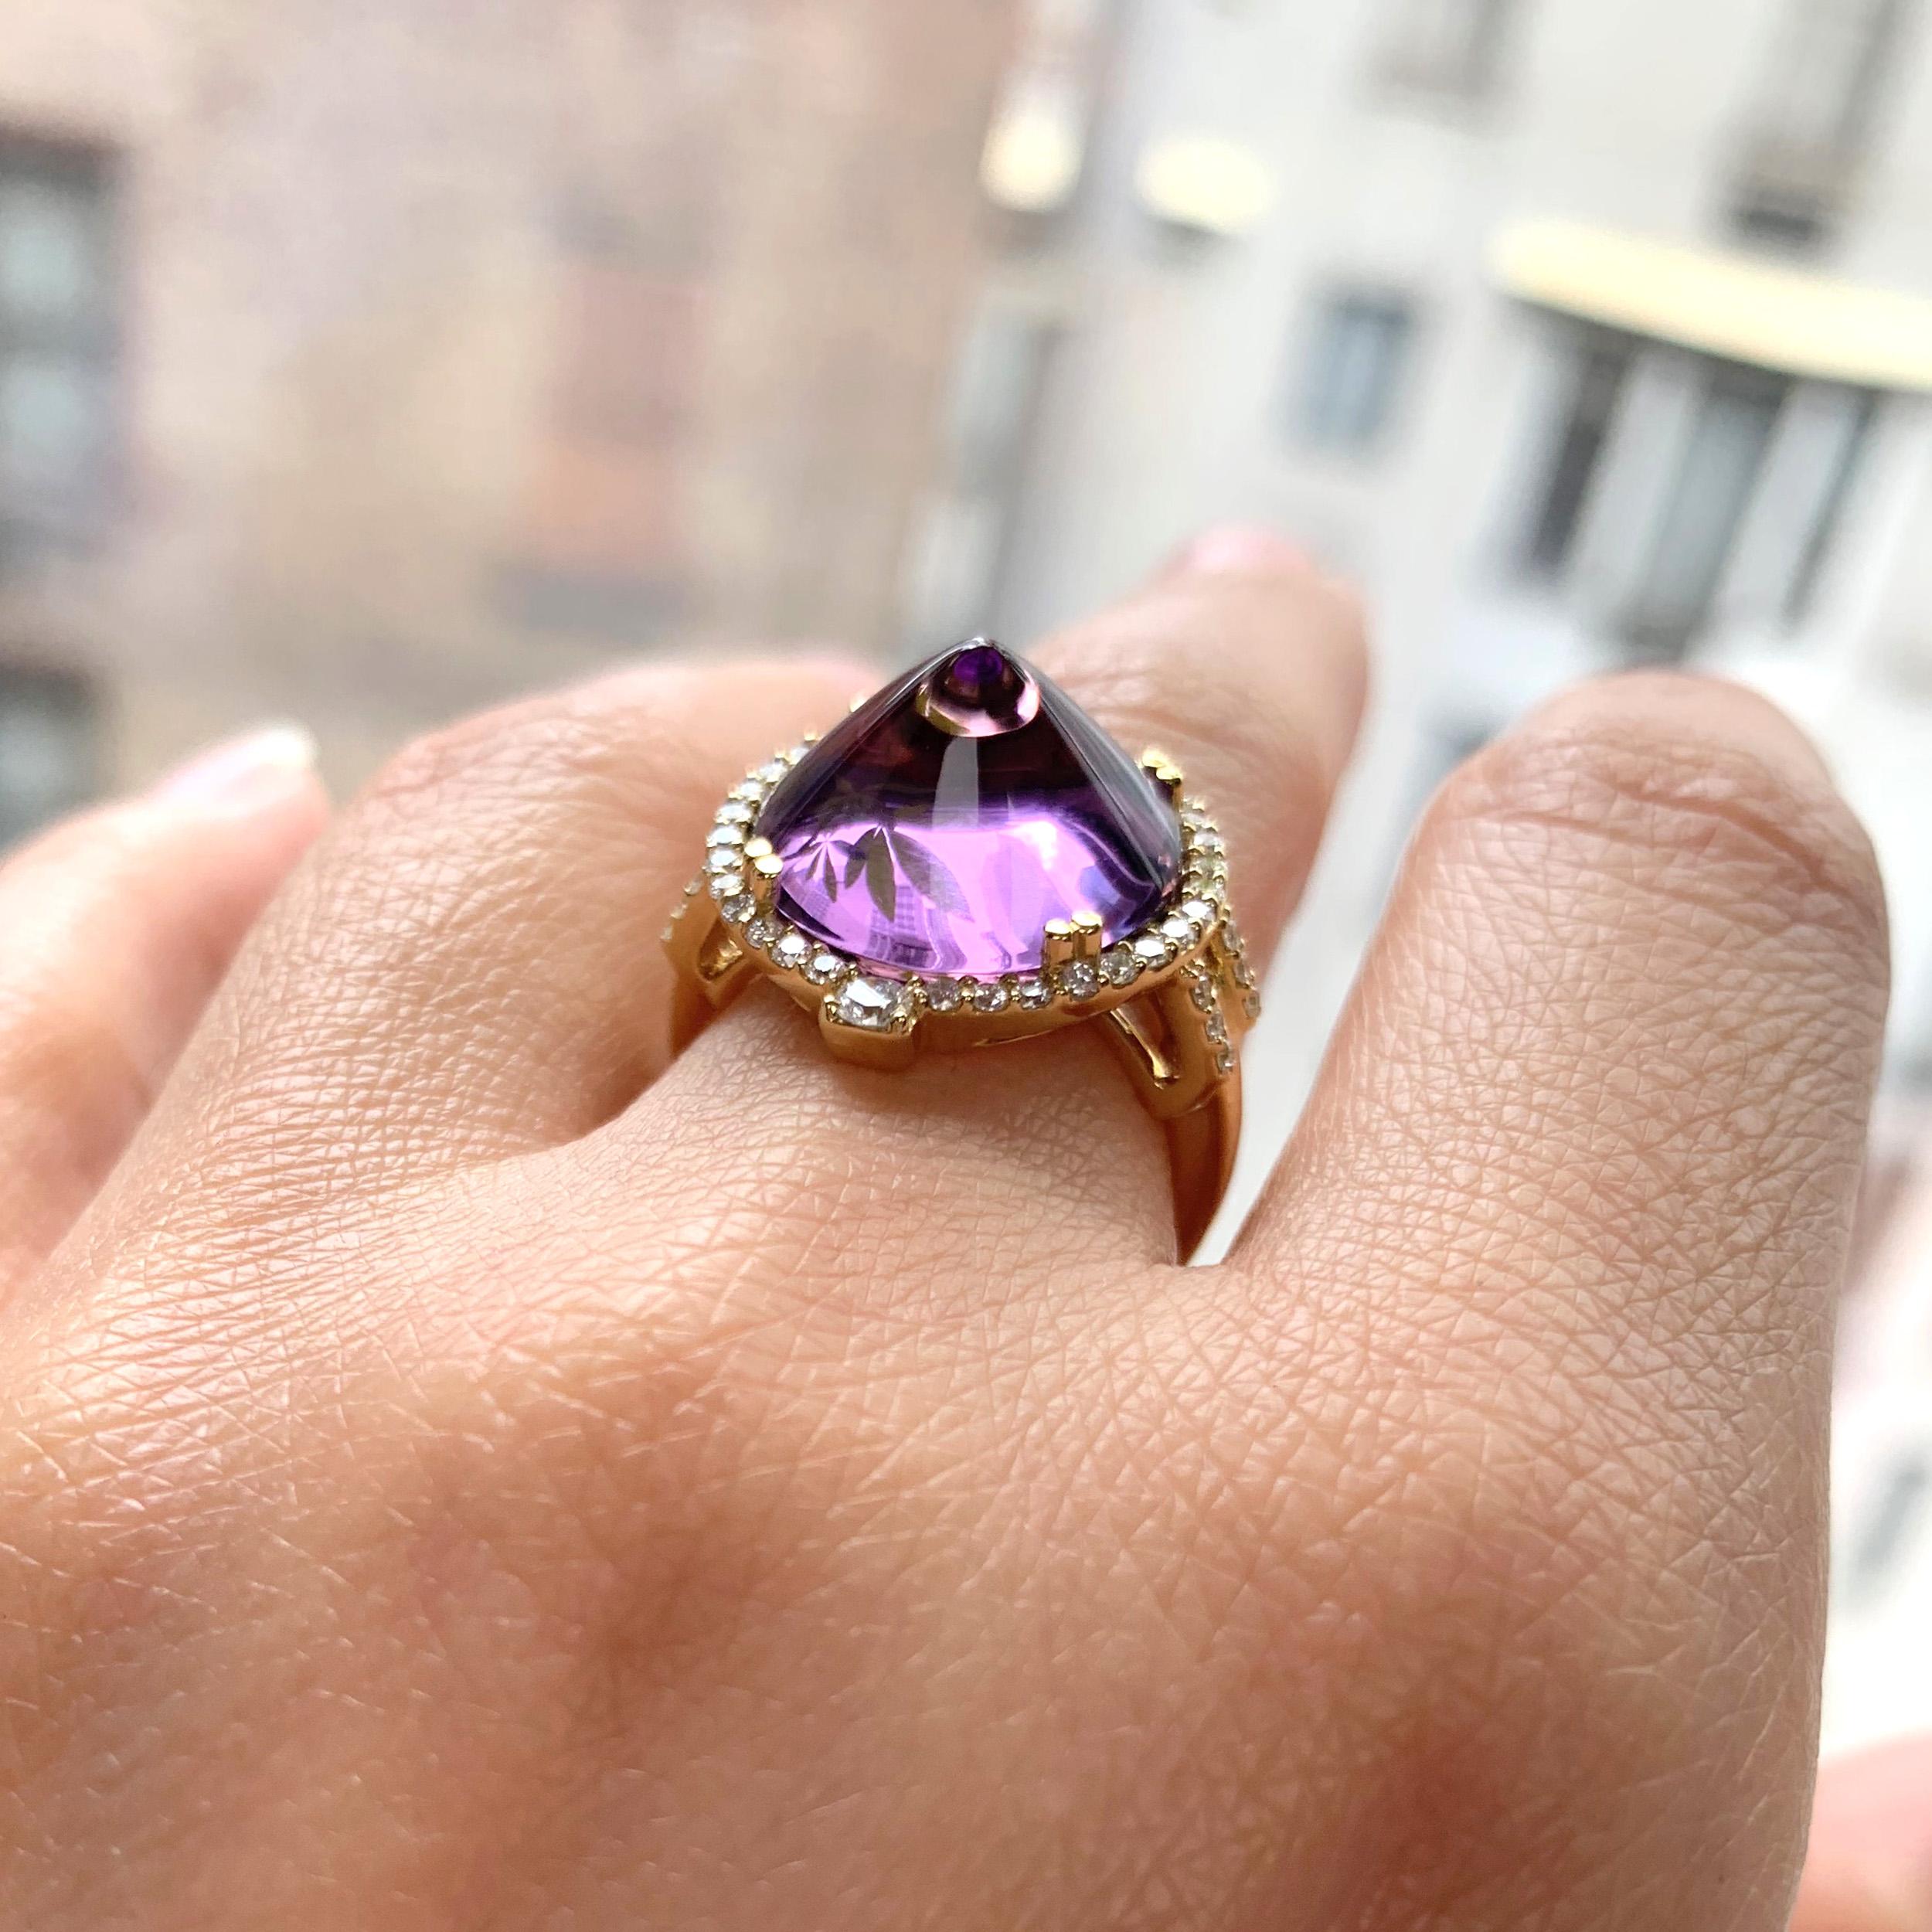 Amethyst Sugar Loaf Ring in 18K Yellow Gold with Diamonds, from 'Rock 'N Roll' Collection. Please allow 2-4 weeks for this item to be delivered.

Stone Size: 14 mm

Diamonds: G-H / VS, Approx. Wt: 0.42 Cts